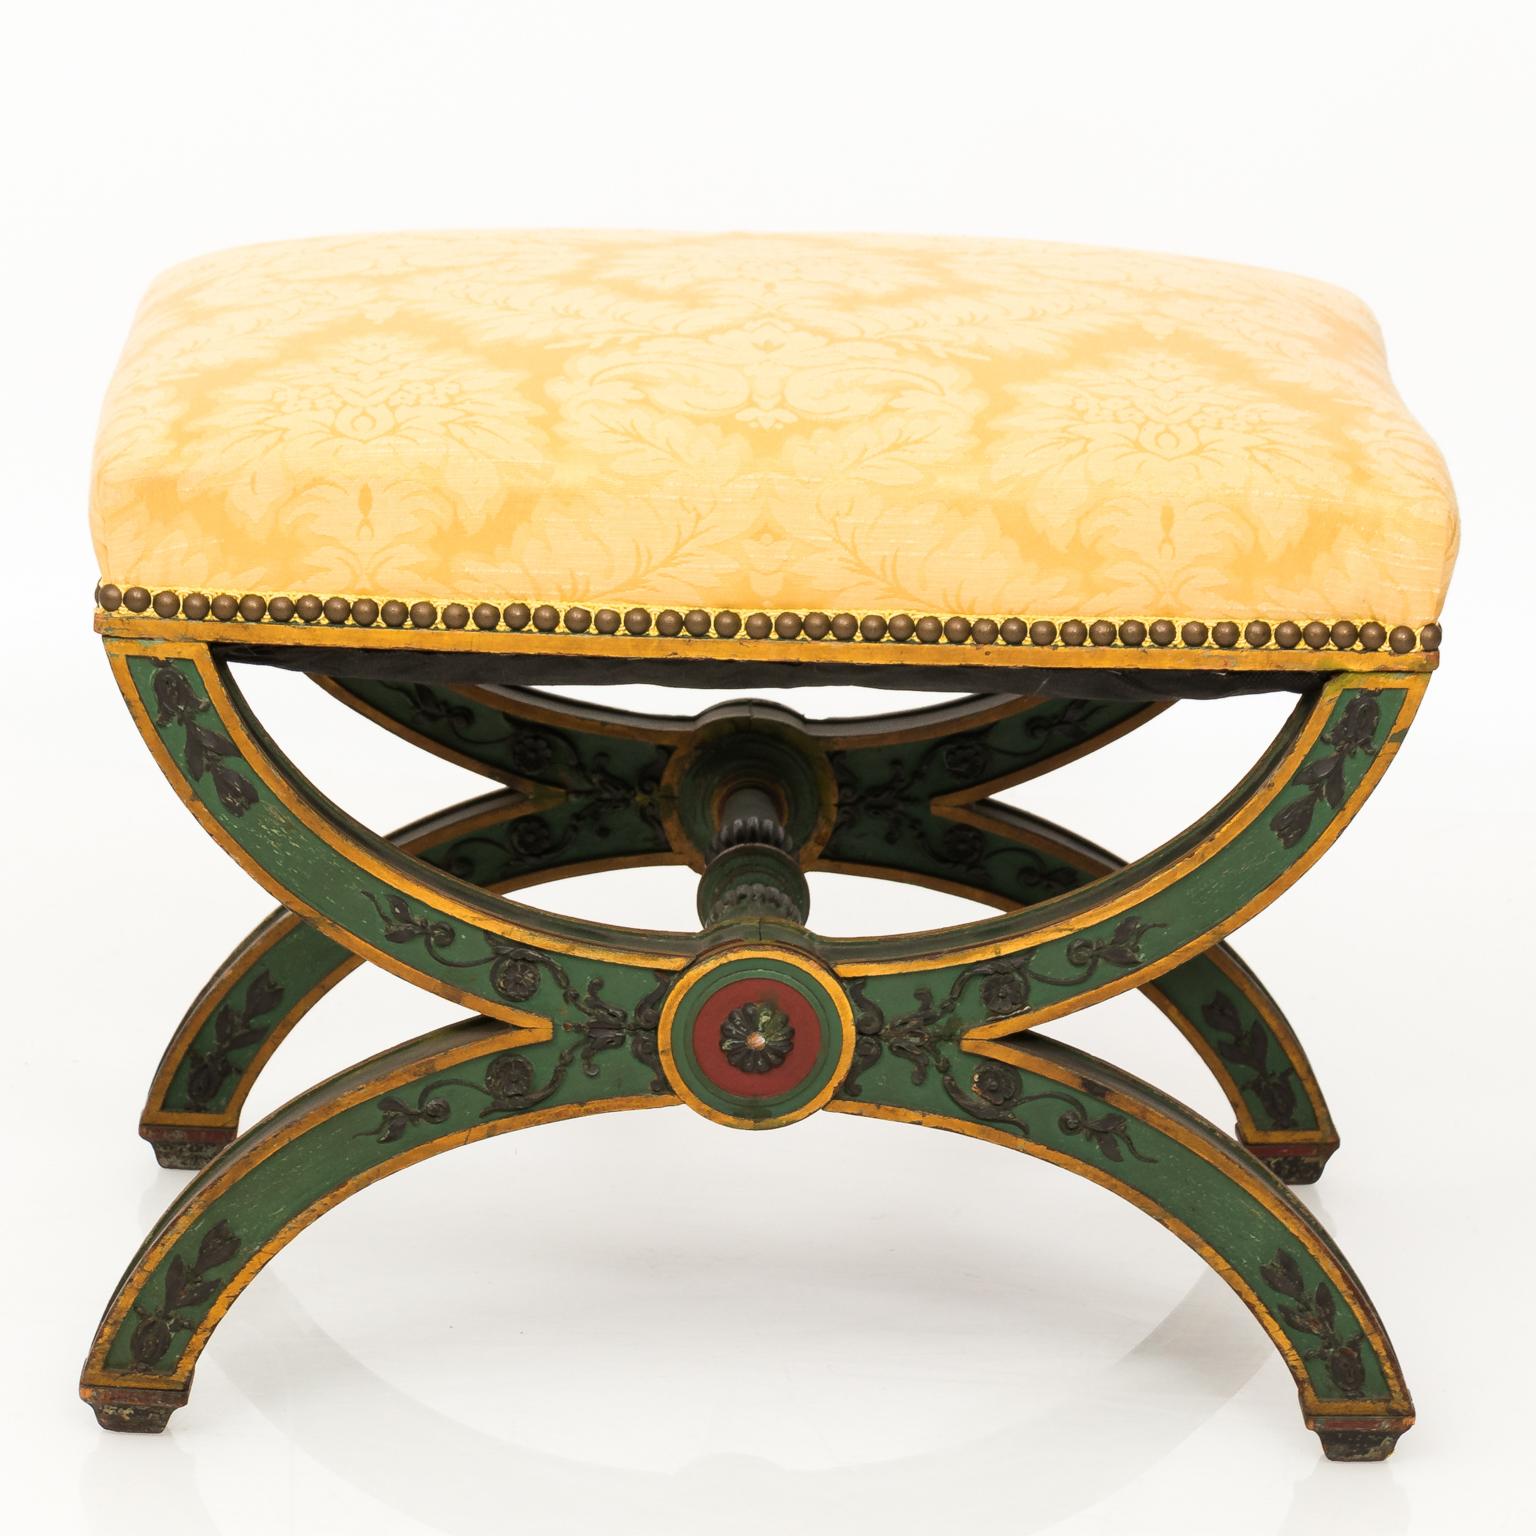 Pair of late19th century Curule style benches with carved and painted medallions and floral arabesques.
 